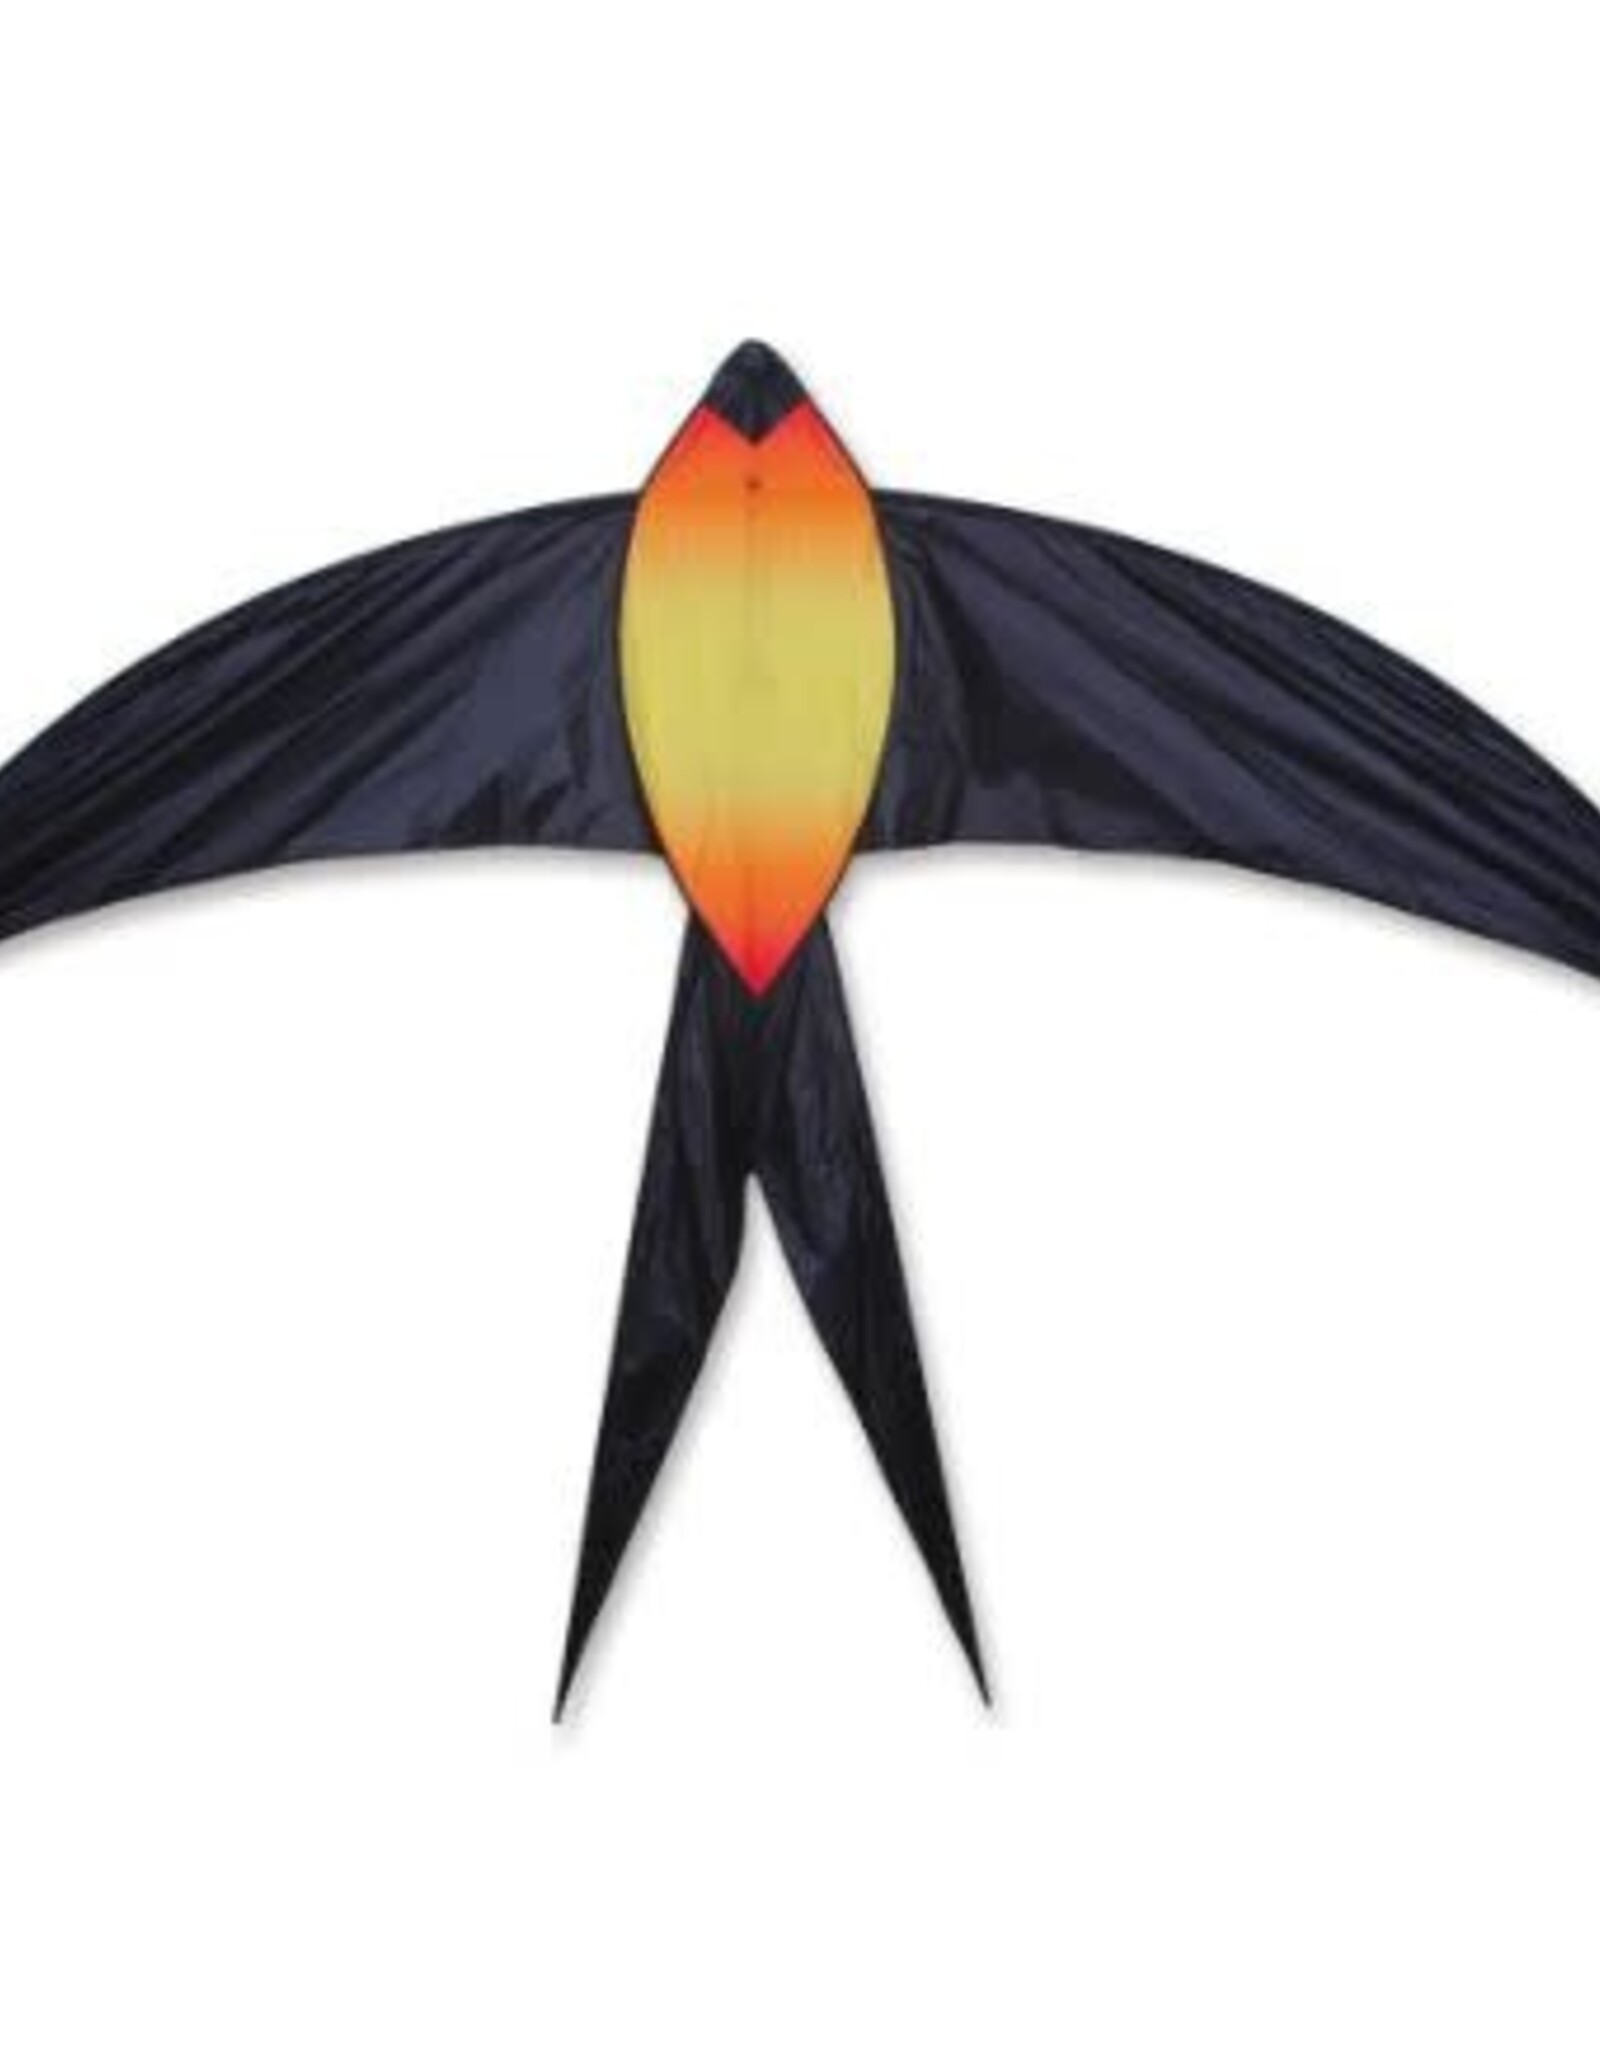 Premier Kites FIRE SWALLOW KITE *Not available for shipping. Pick up only.